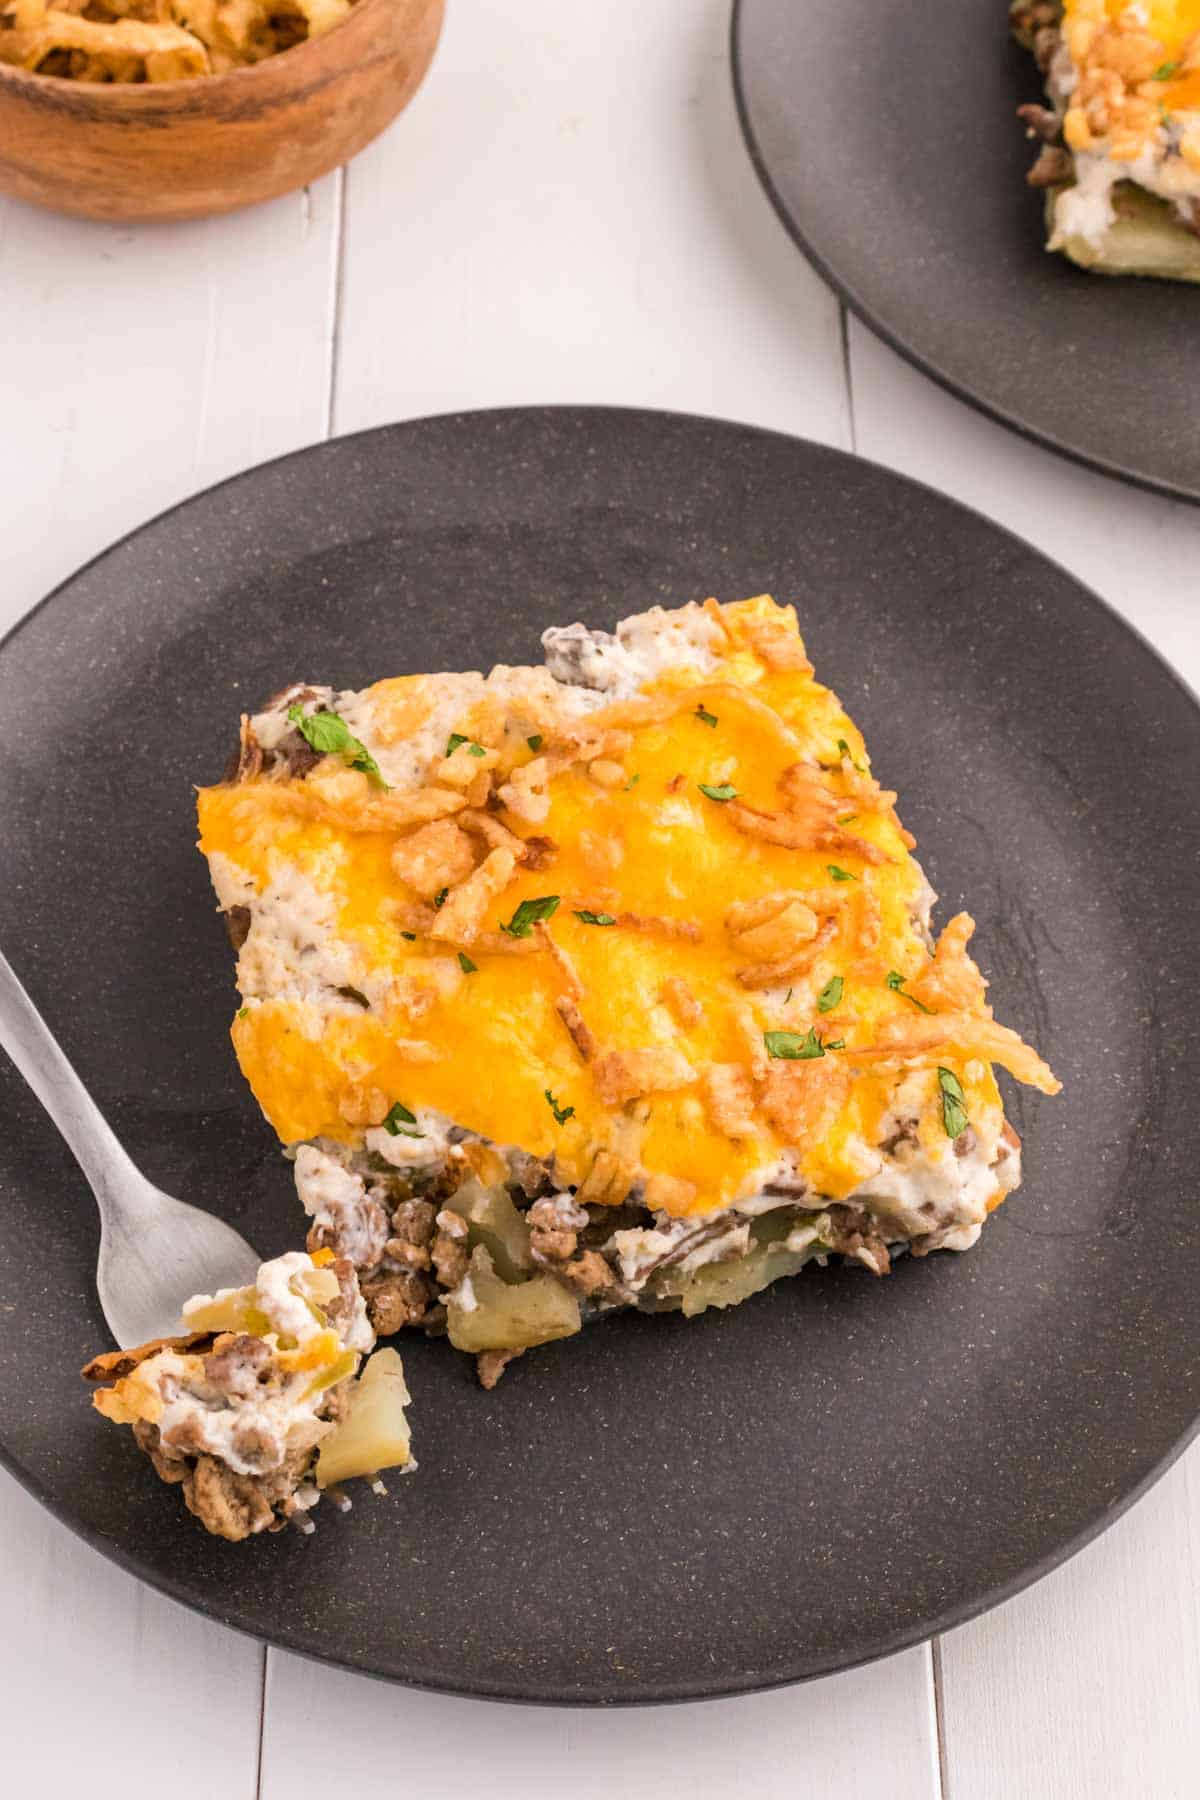 Hobo Casserole is a layered ground beef and sliced potato casserole loaded with diced bell peppers, onions, sour cream, cream of mushroom soup, cheddar cheese and French's crispy fried onions.